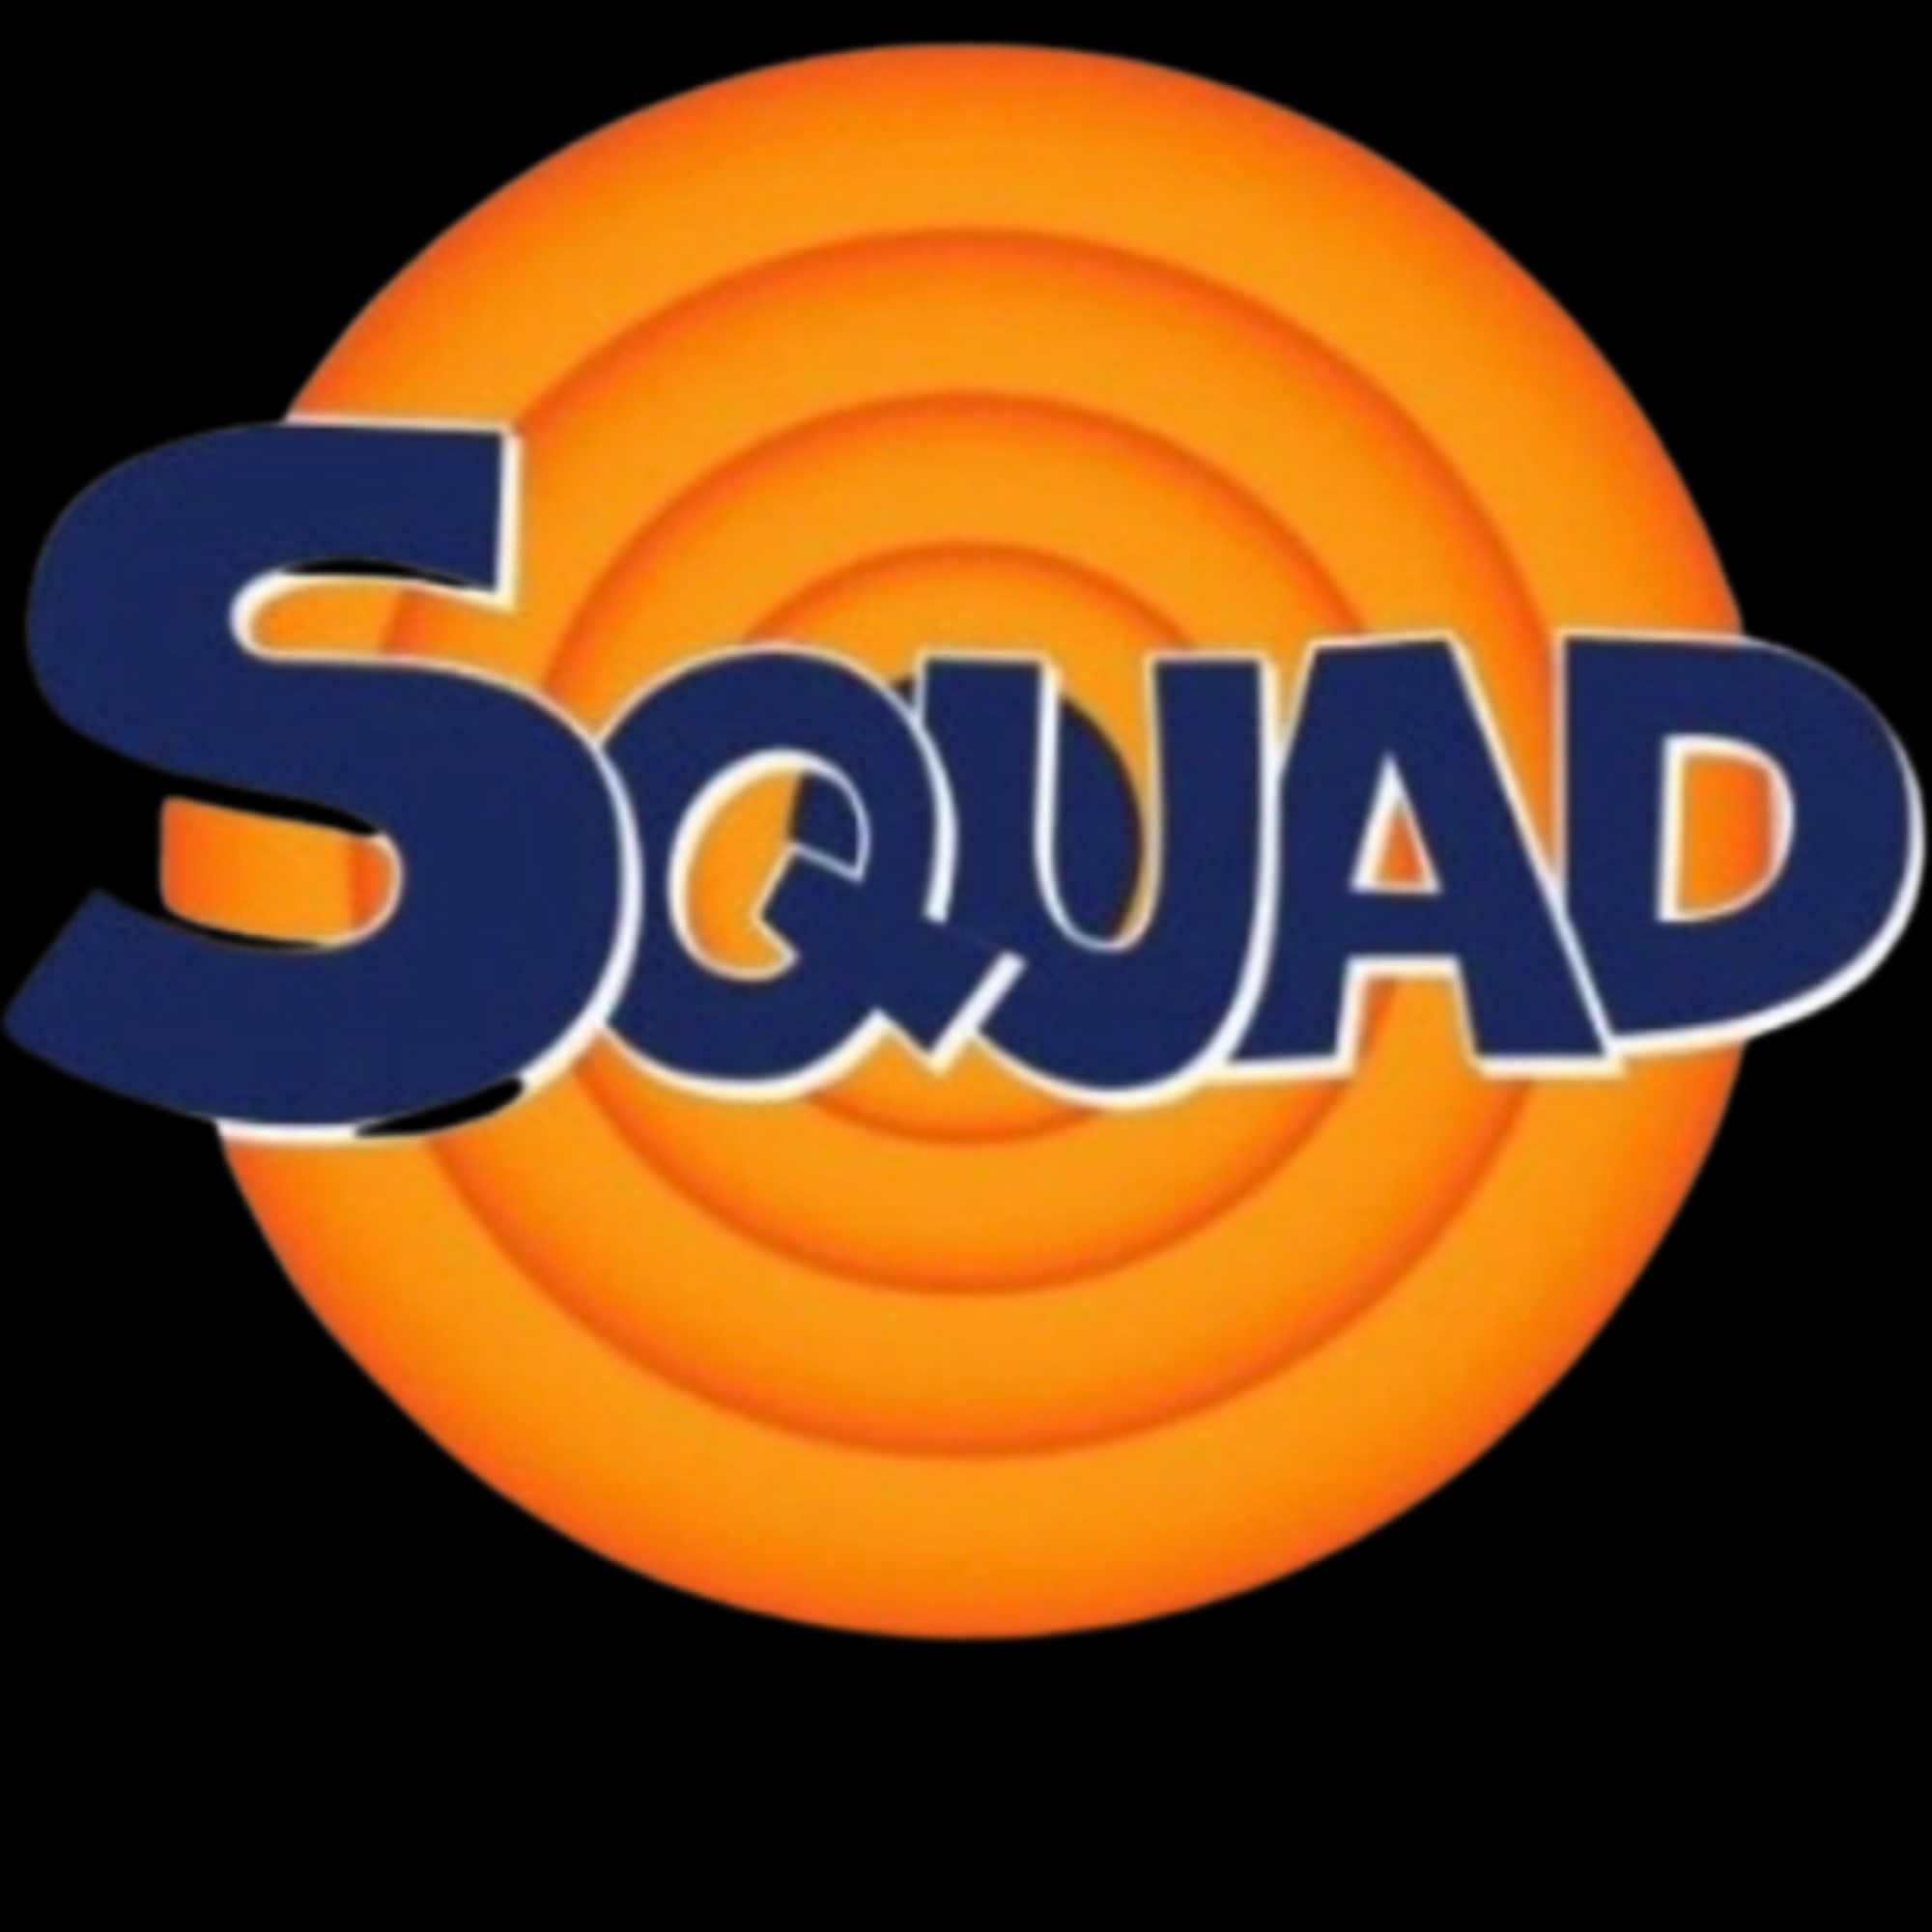 The official logo of Squad